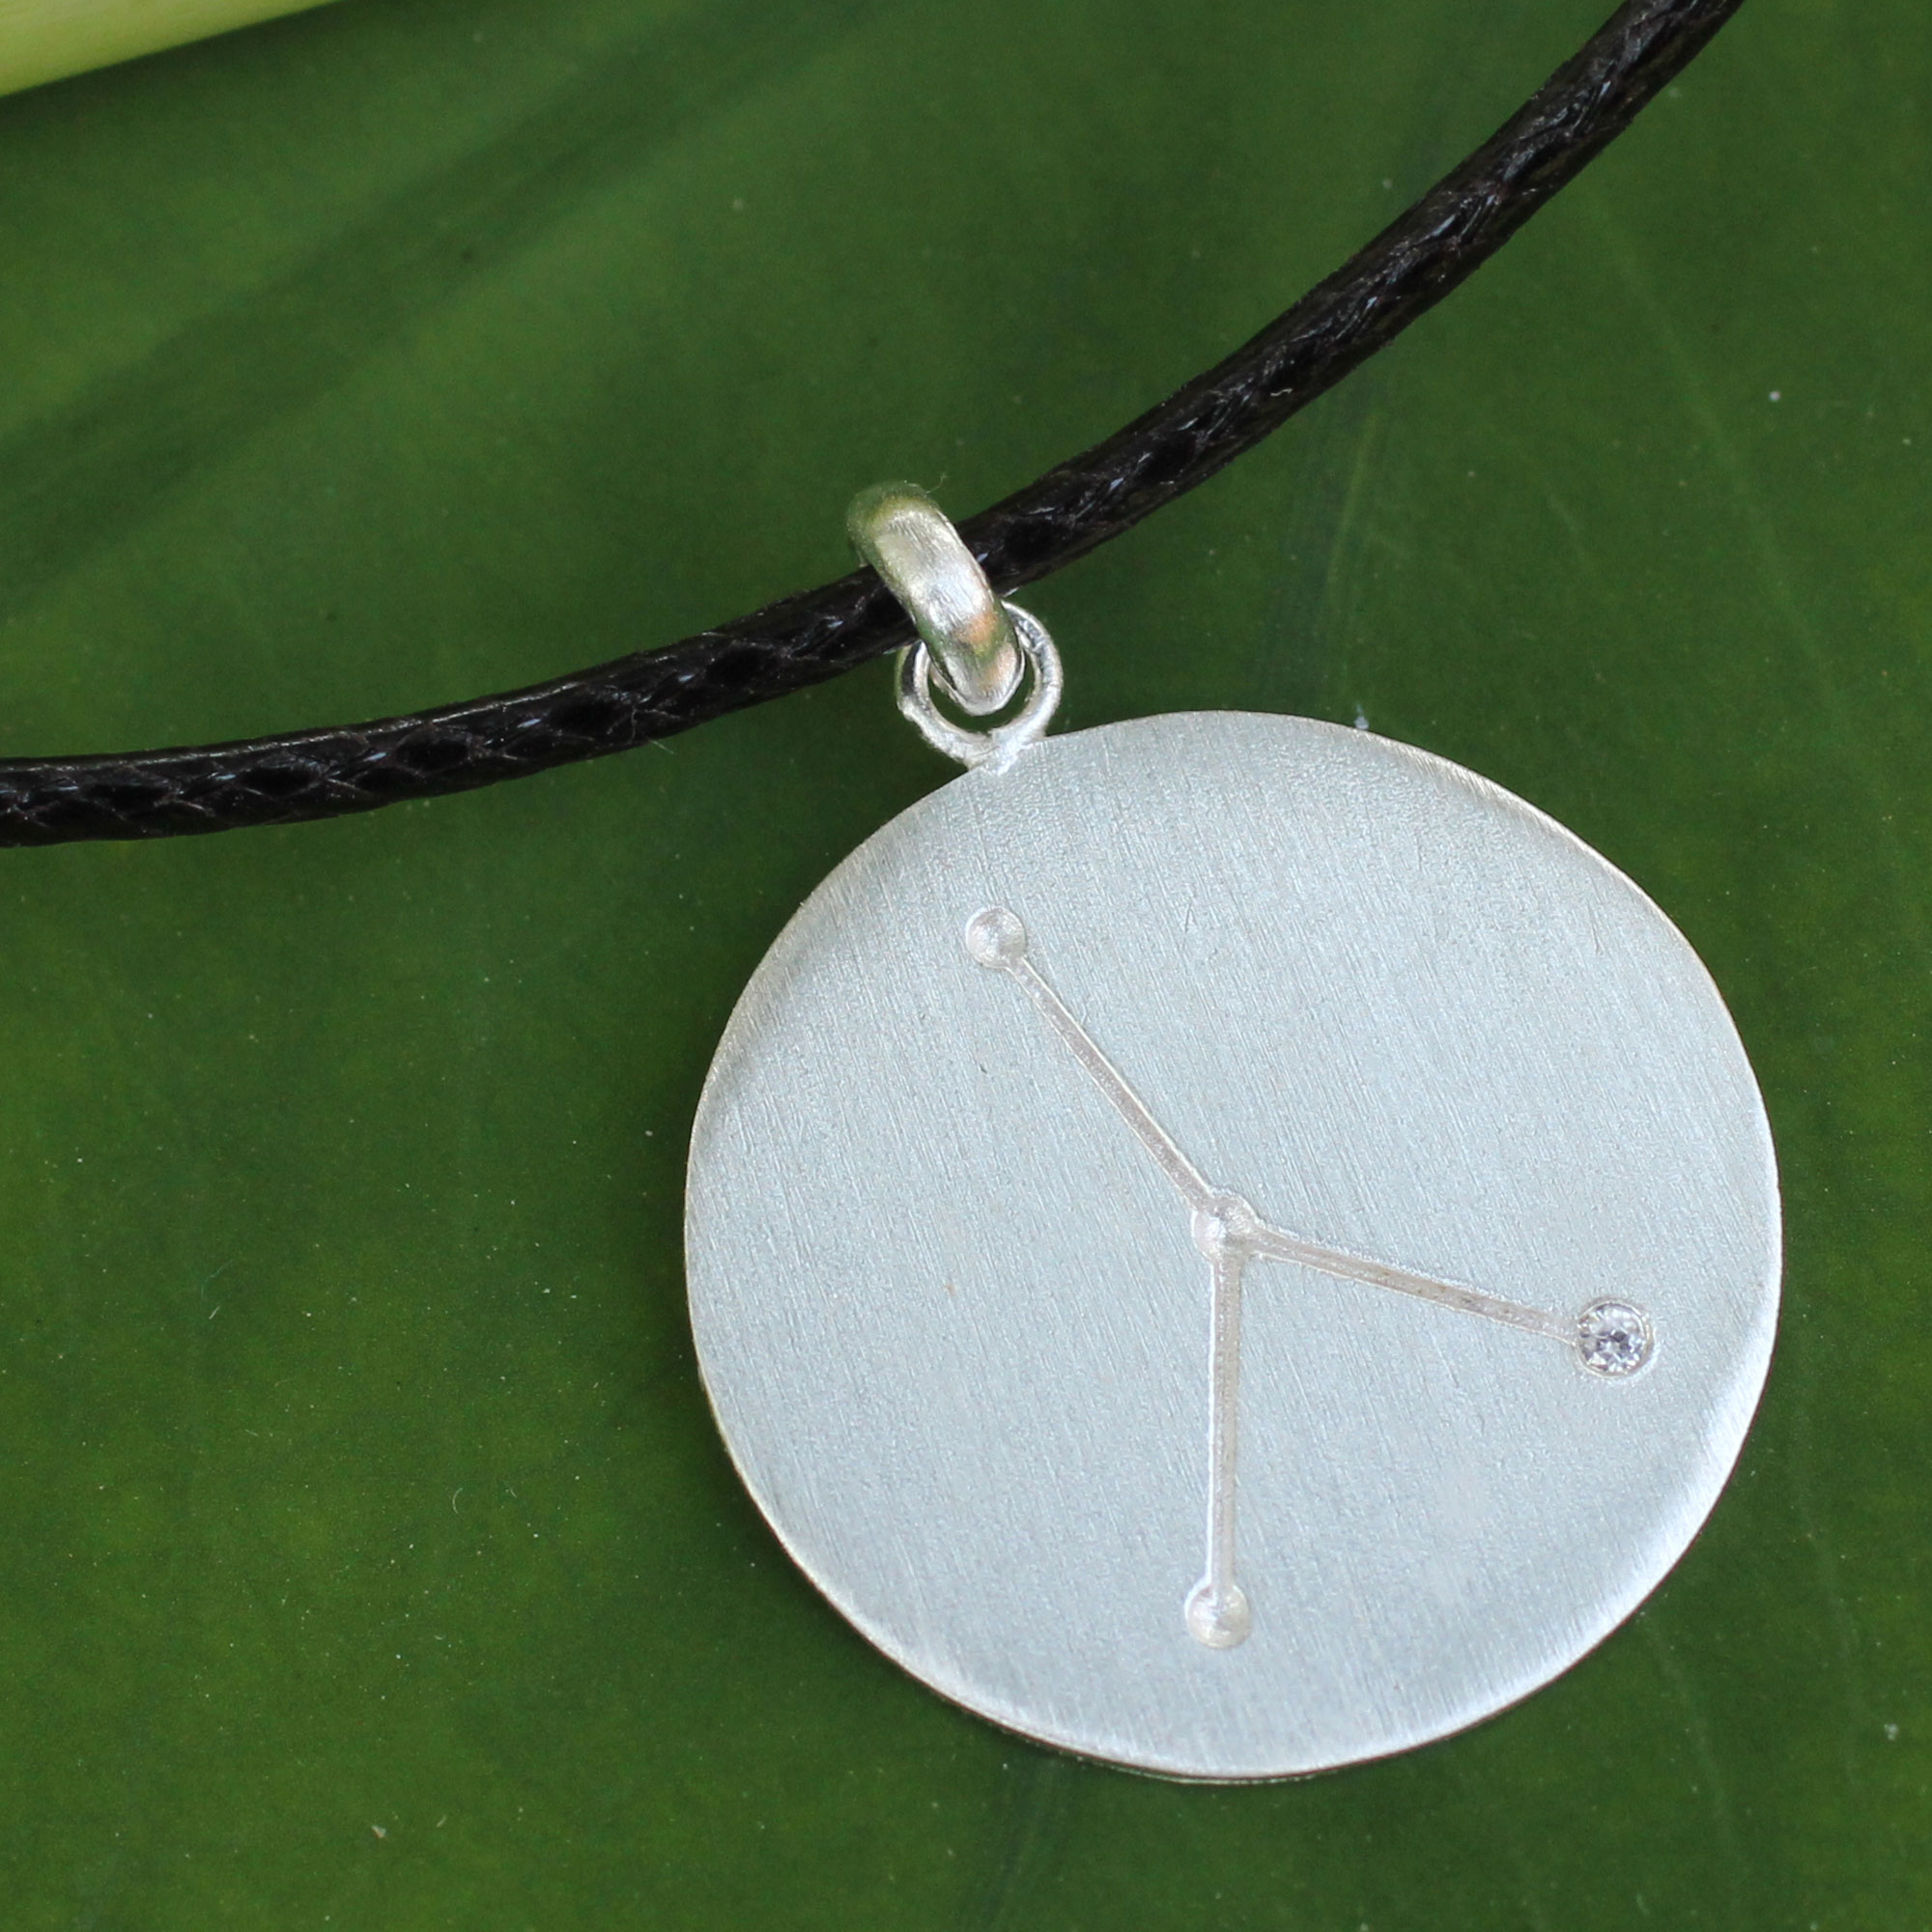 Sterling Silver Cancer Zodiac Sign Pendant Necklace